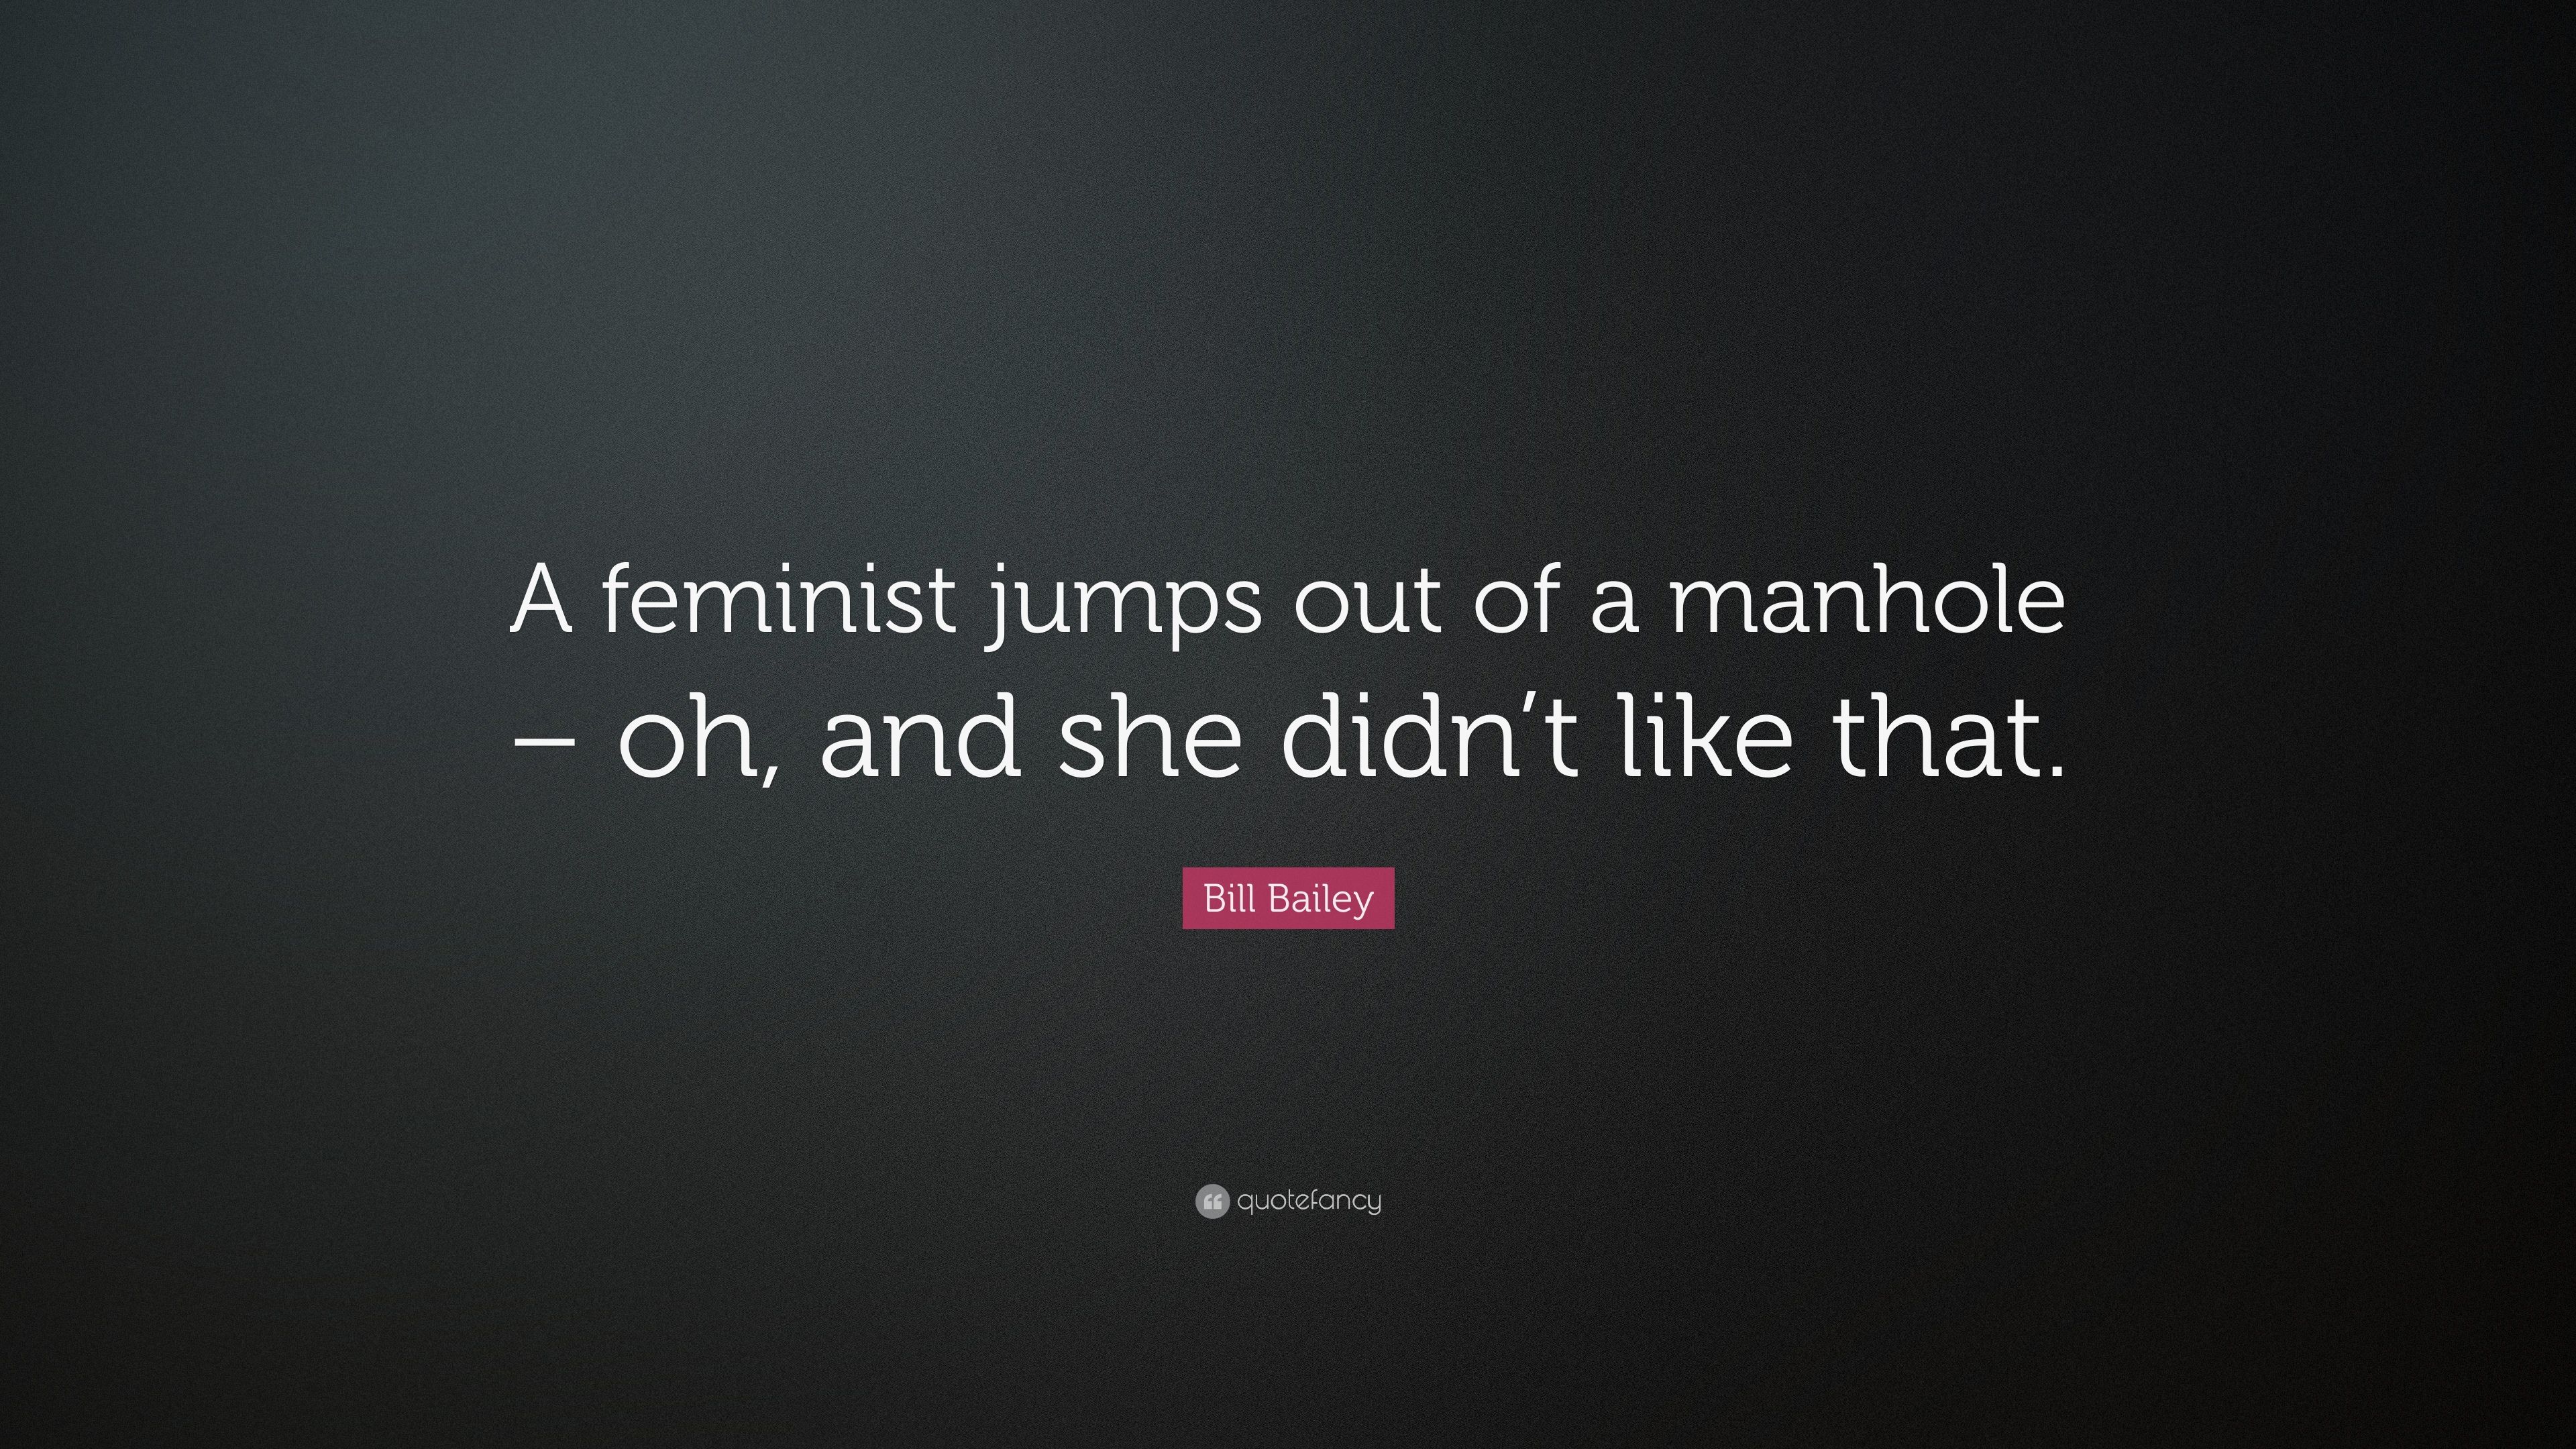 Bill Bailey Quote: “A feminist jumps out of a manhole